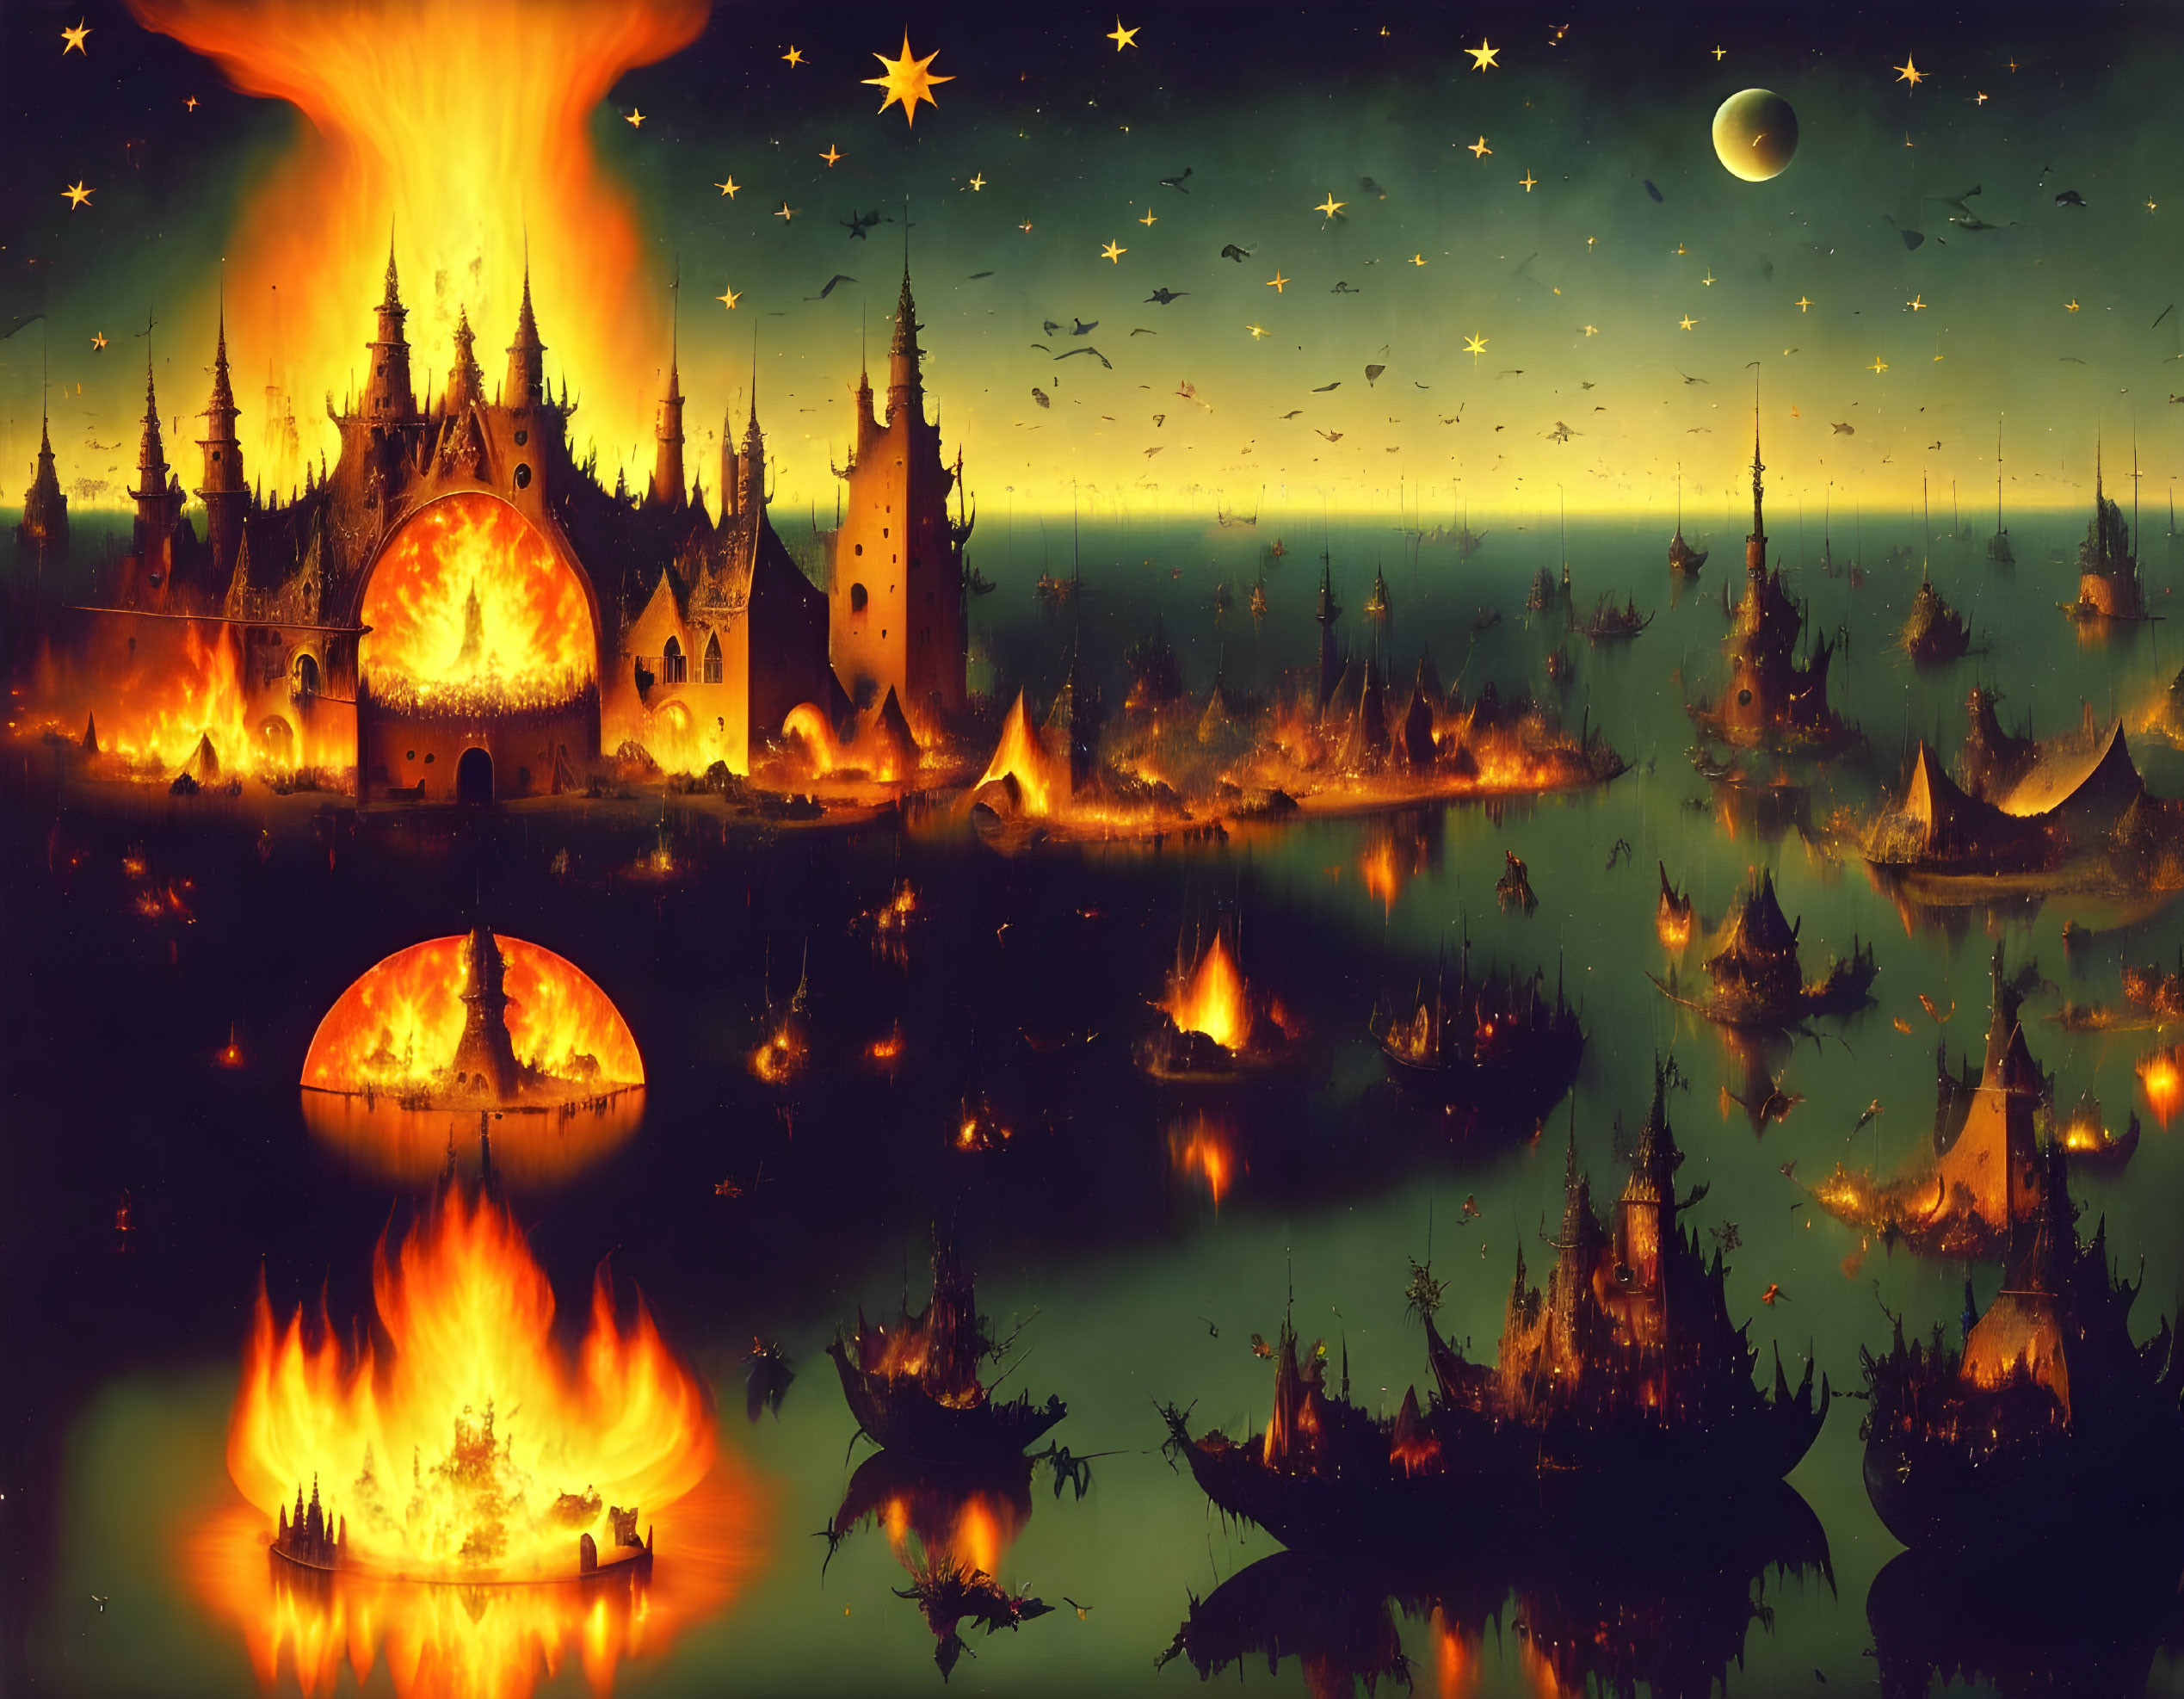 Fantasy landscape at night with fiery eruptions, starry skies, and gothic structures